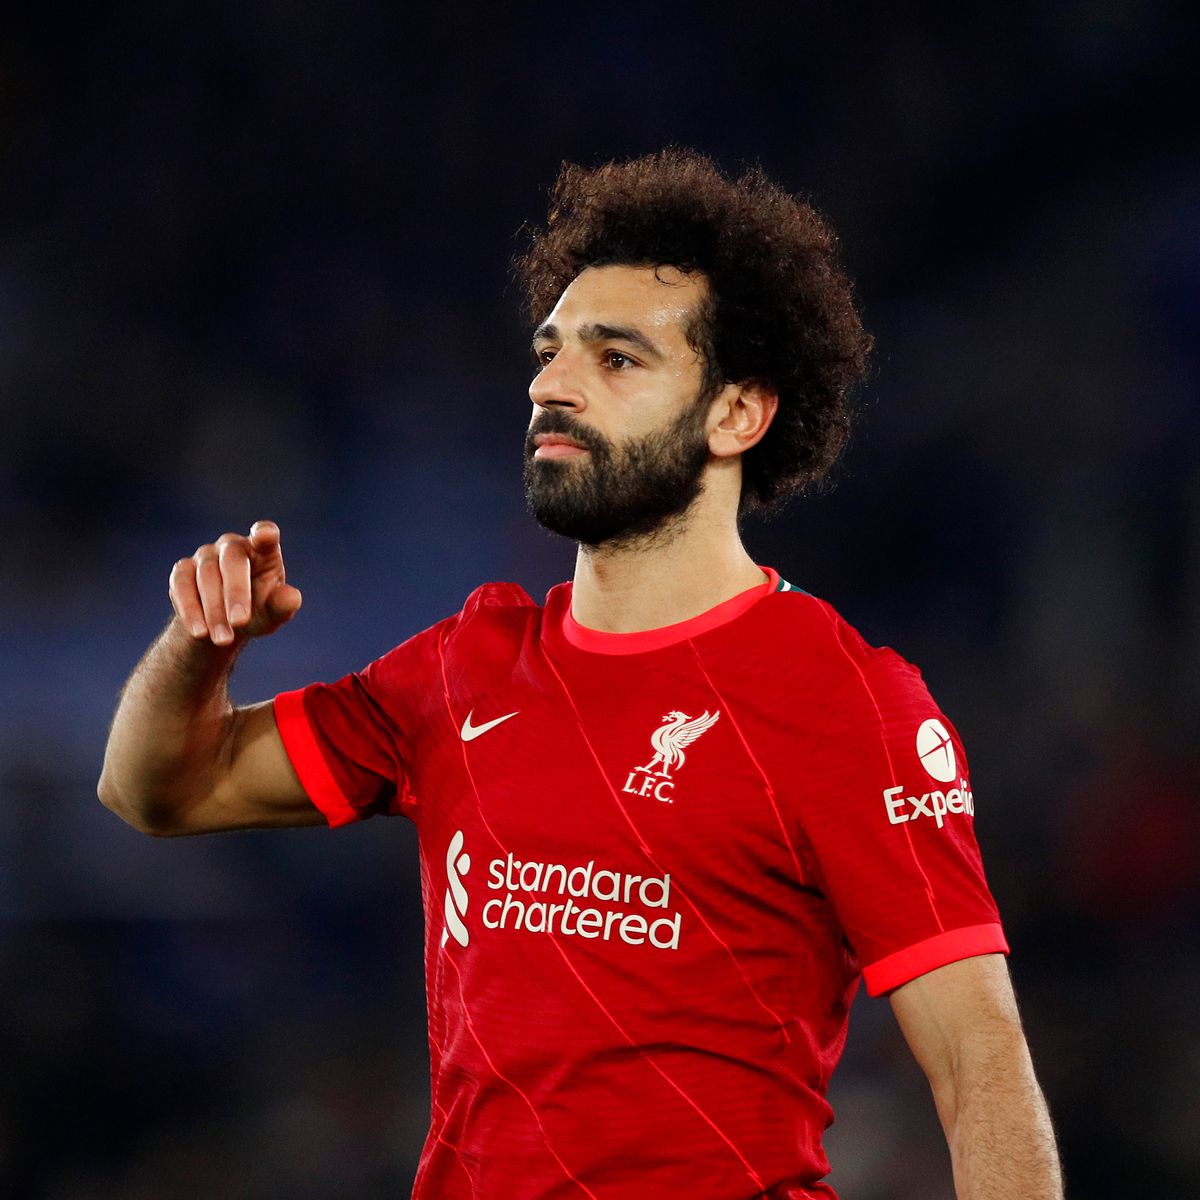 Mohamed Salah Matches Wayne Rooney’s Record in Liverpool’s 4-2 Win Over Tottenham